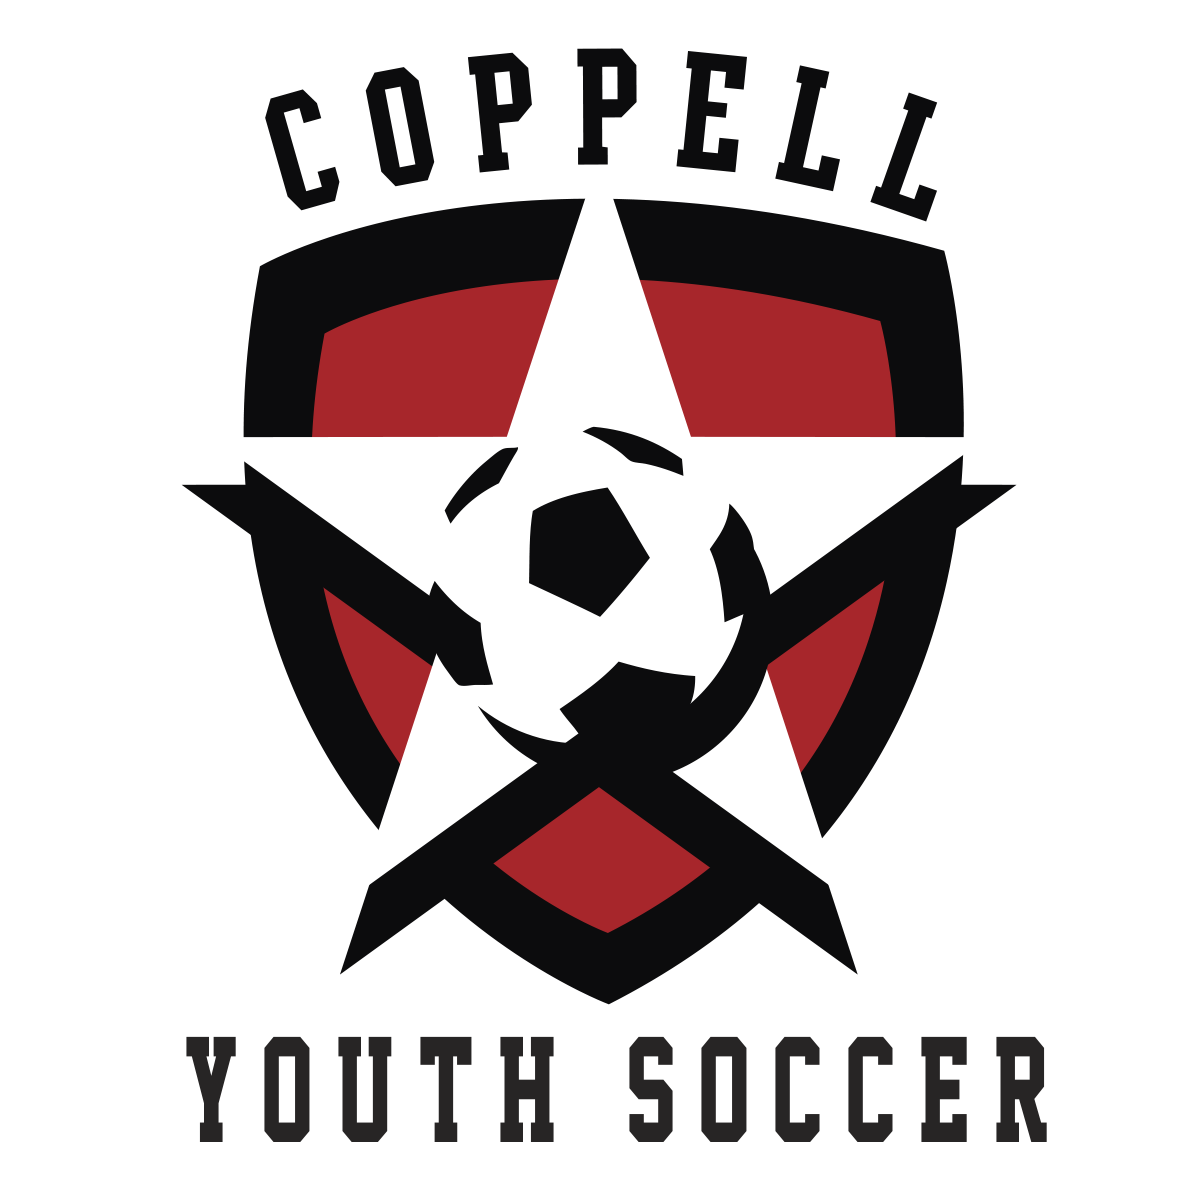 Coppell Youth Soccer